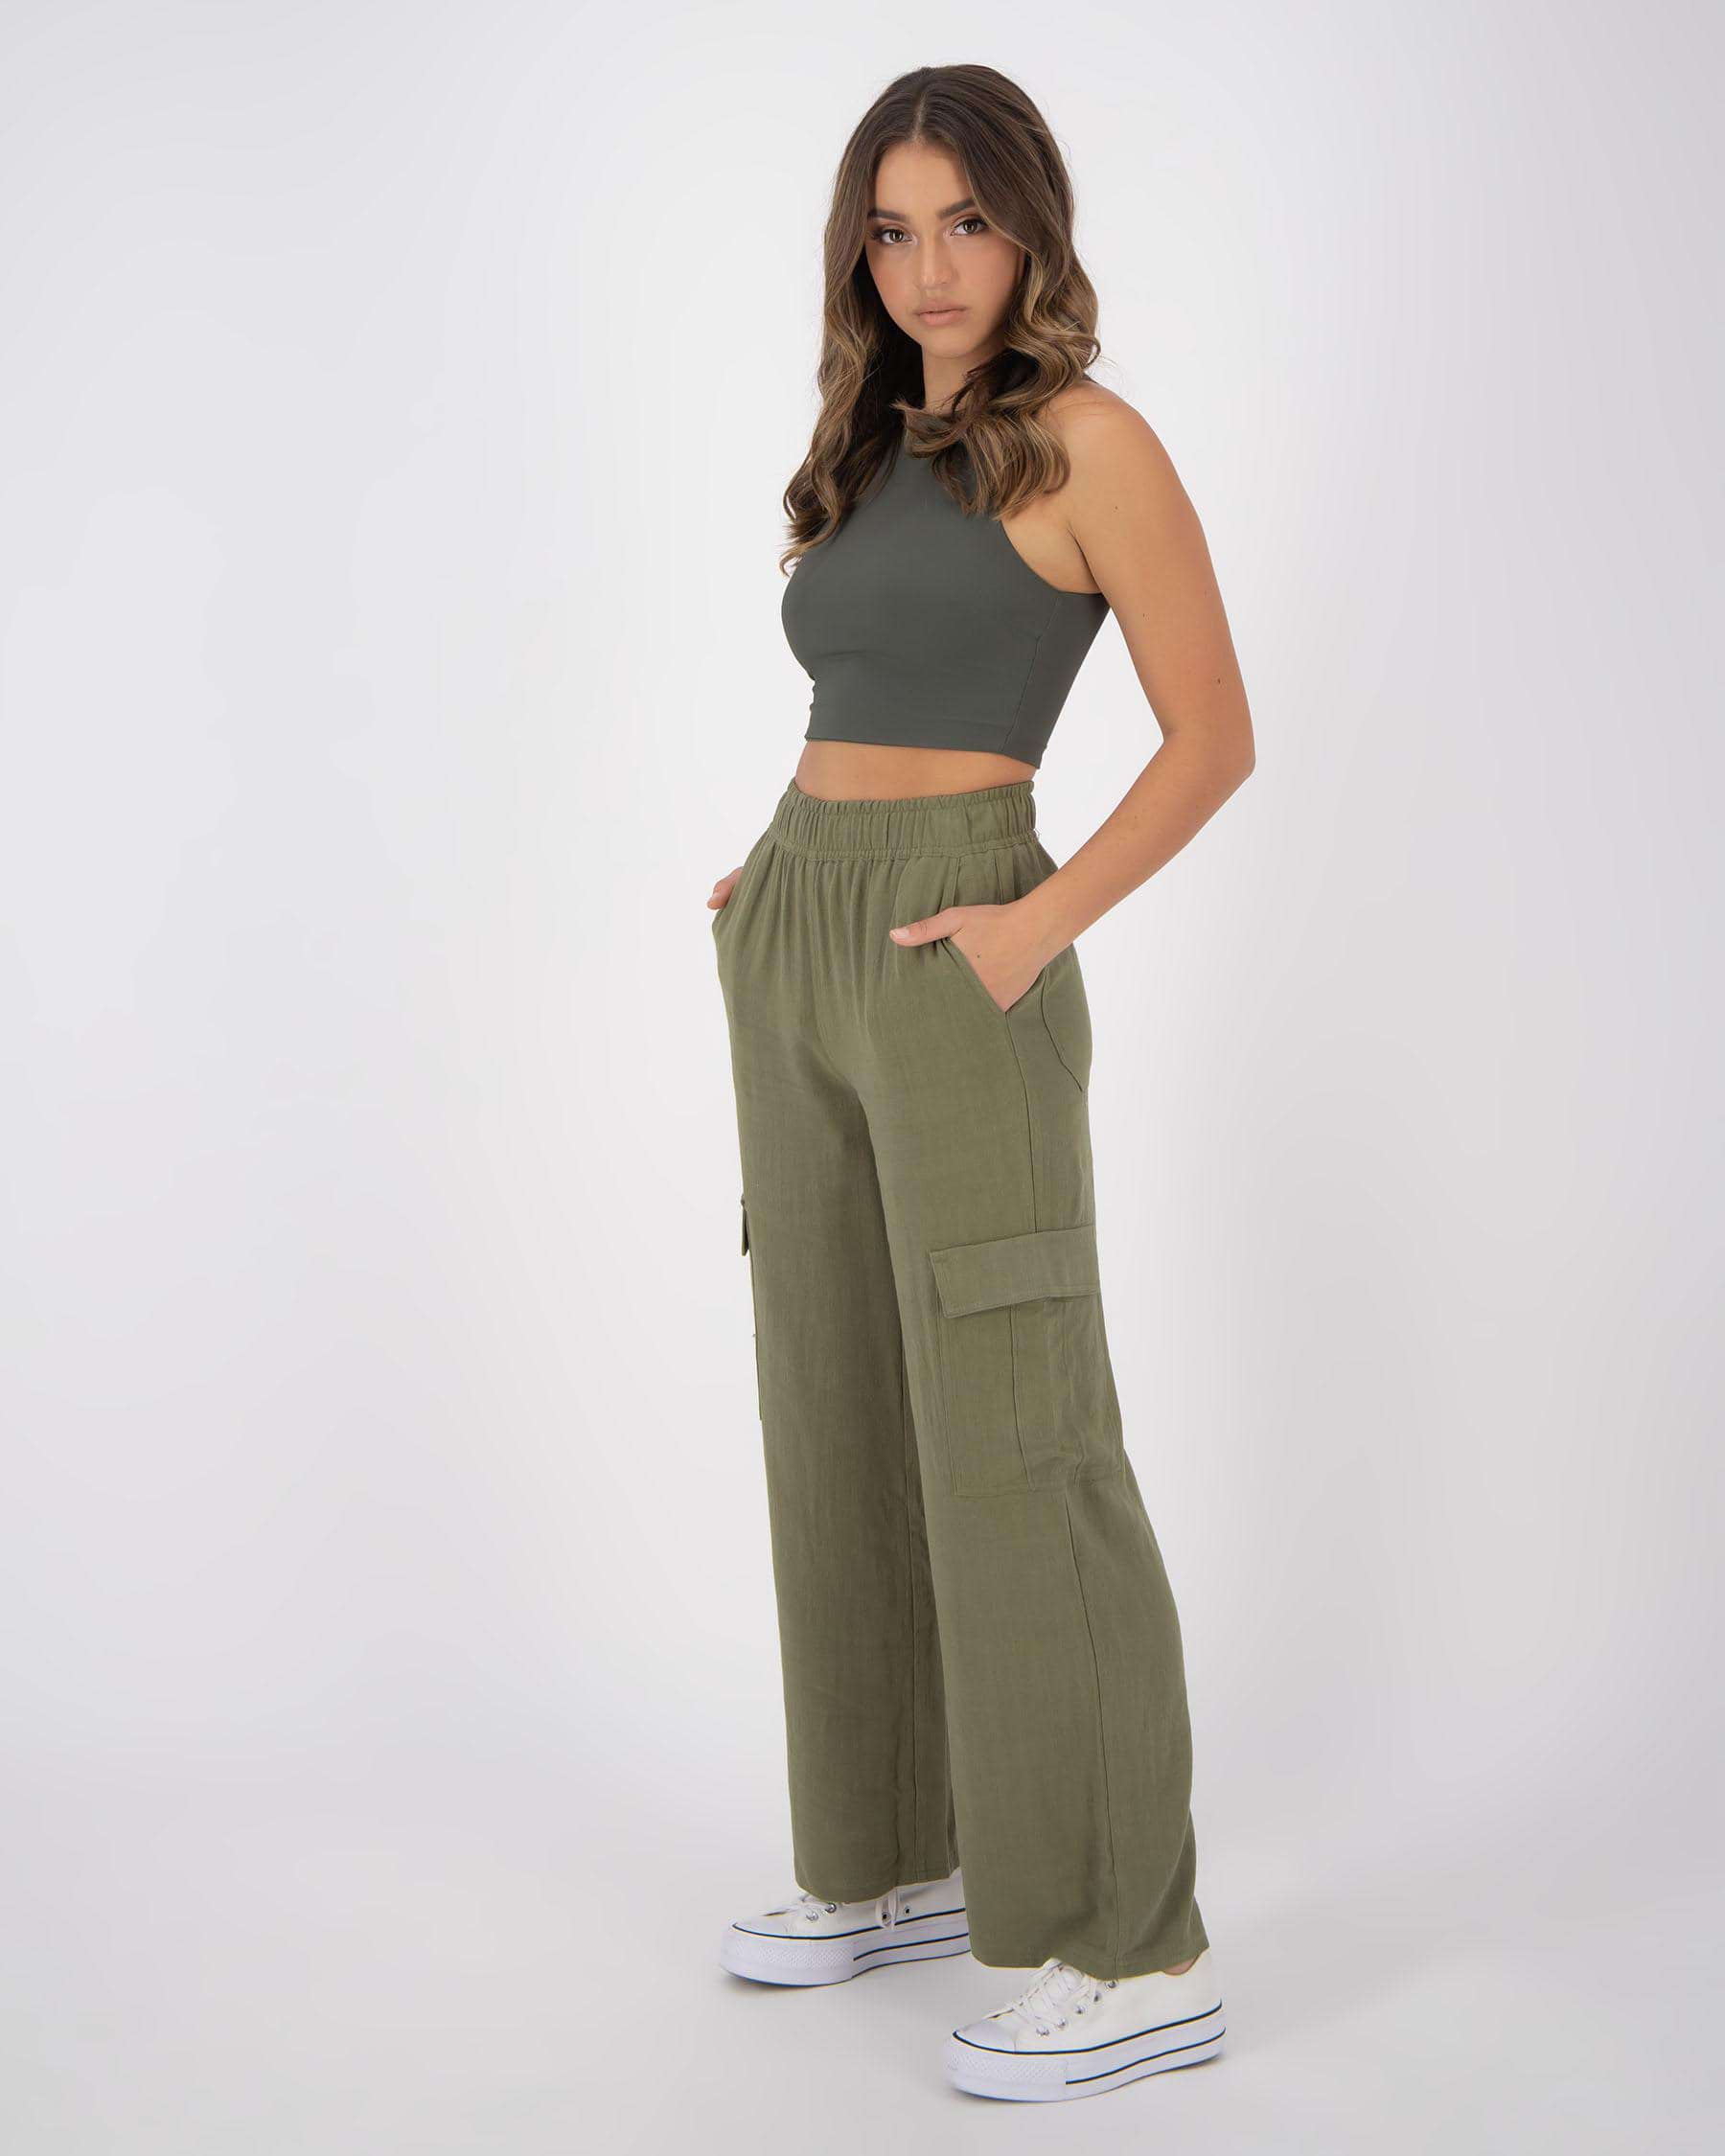 Ava And Ever Davenport Beach Pants In Khaki - Fast Shipping & Easy ...